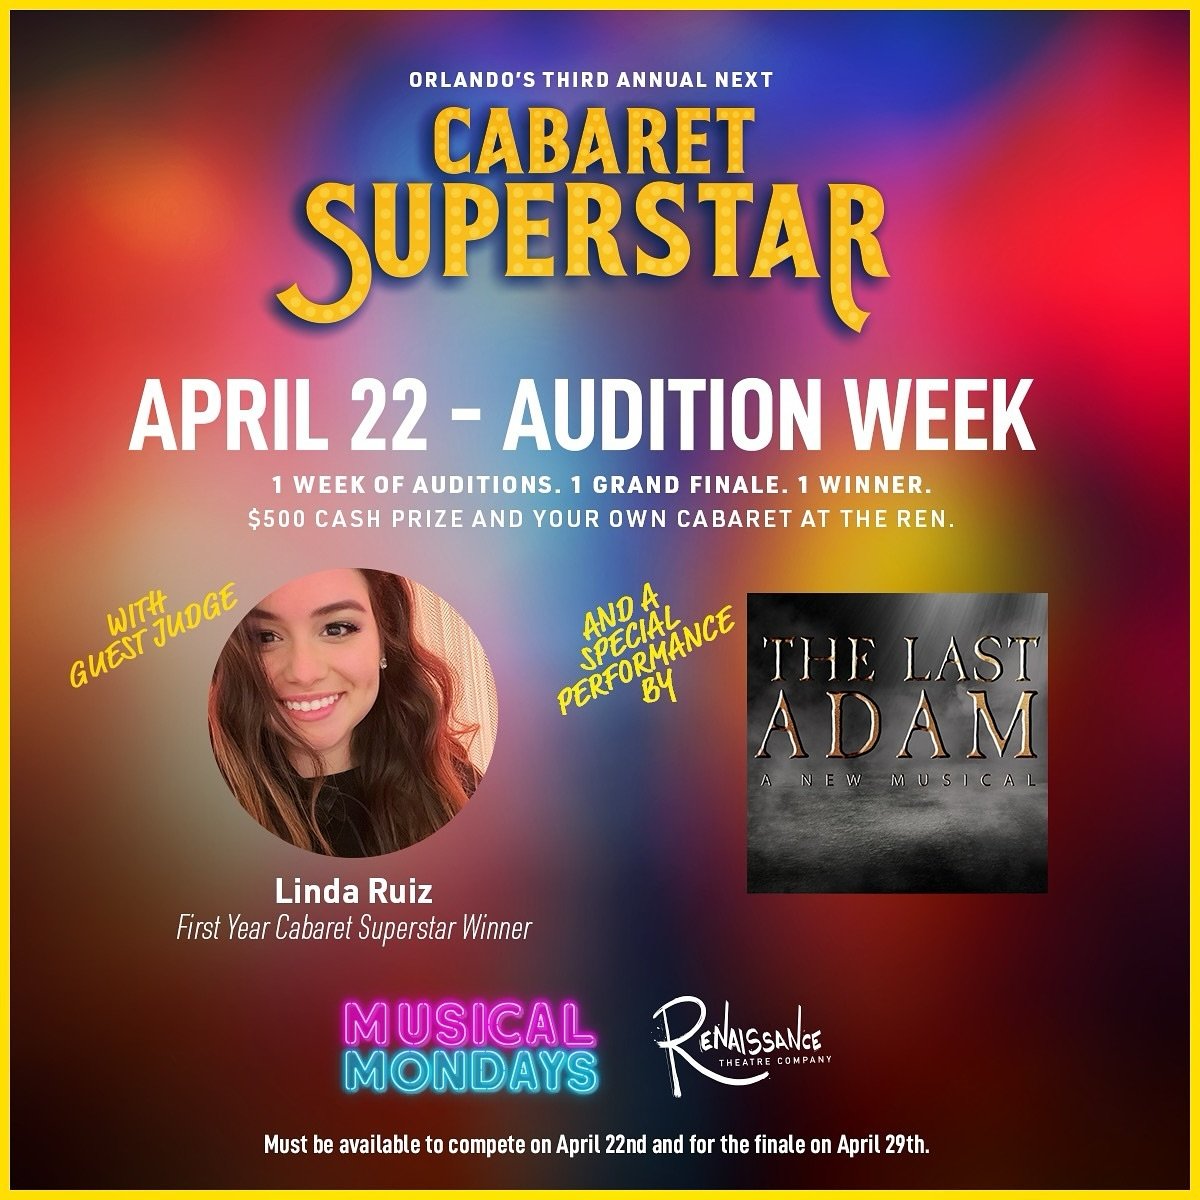 TOMORROW starts &ldquo;Orlando&rsquo;s Next Cabaret Superstar!&rdquo; New this year, there&rsquo;s only ONE night to audition(TOMORROW). Finalists will be selected to compete on Monday the 29th. 

At the Grand Finale, the audience will select one sin